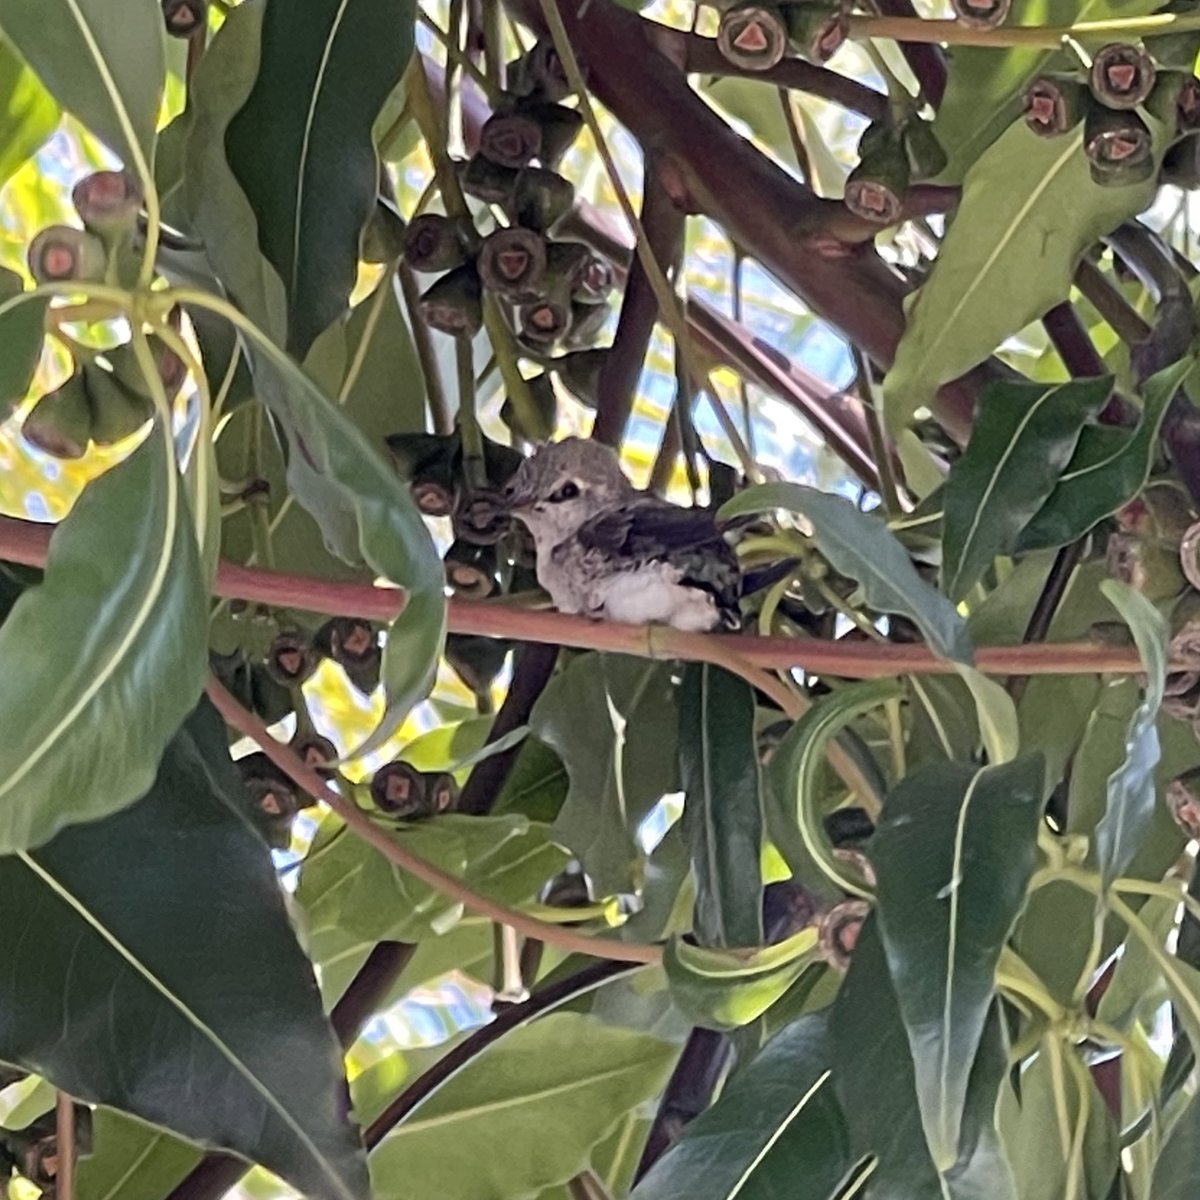 The biggest news of the day… the baby hummingbird came out of the nest!